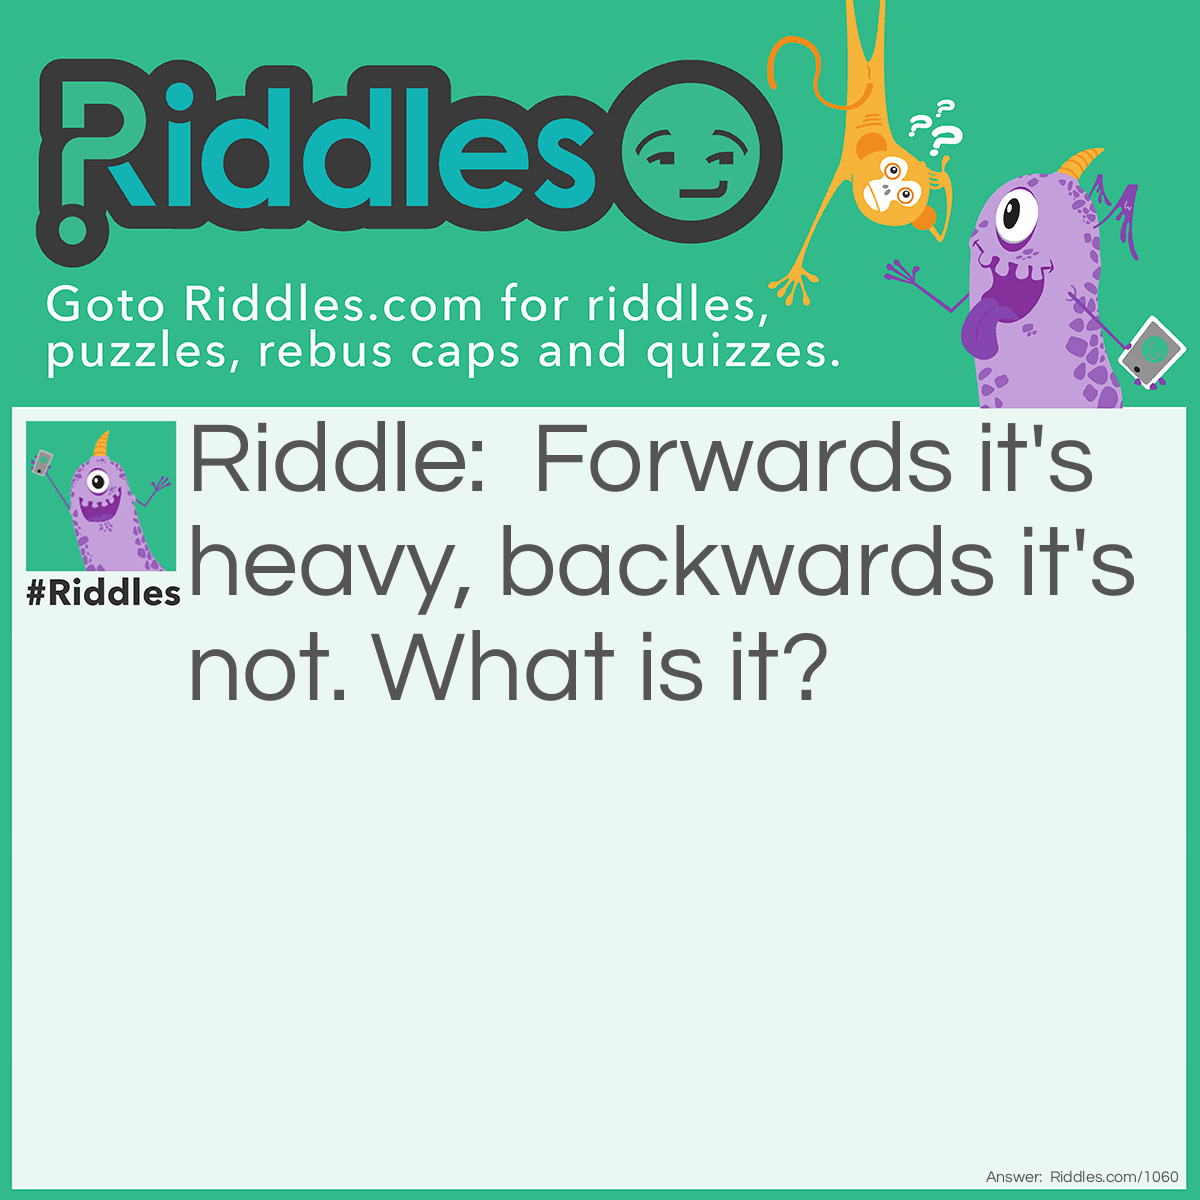 Riddle: Forwards it's heavy, backwards it's not. What is it? Answer: Ton.